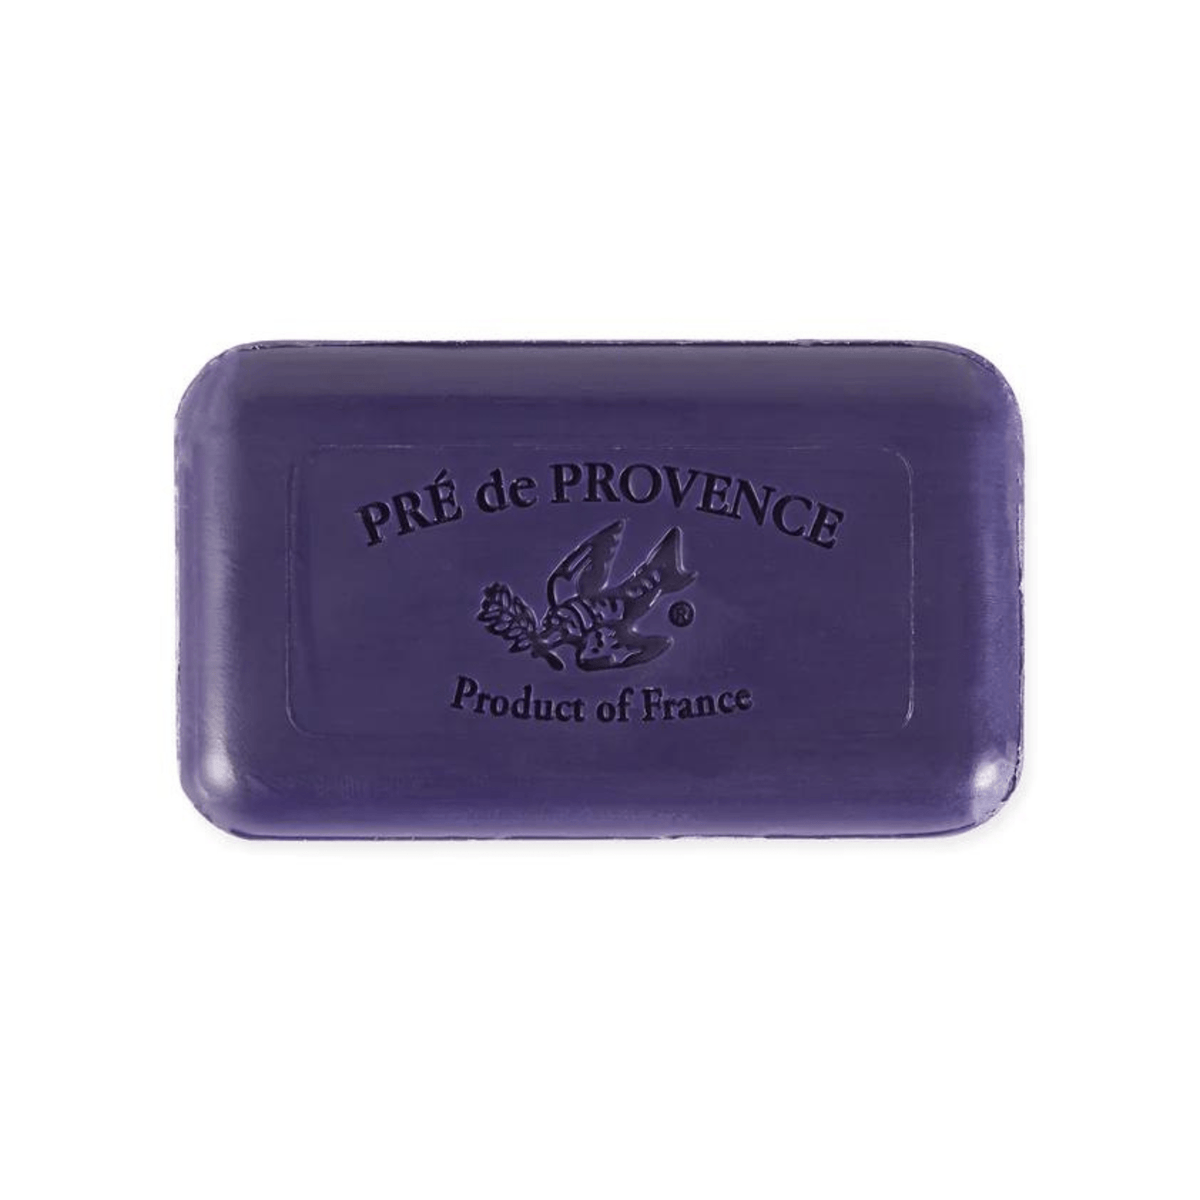 Primary Image of Black Currant Soap